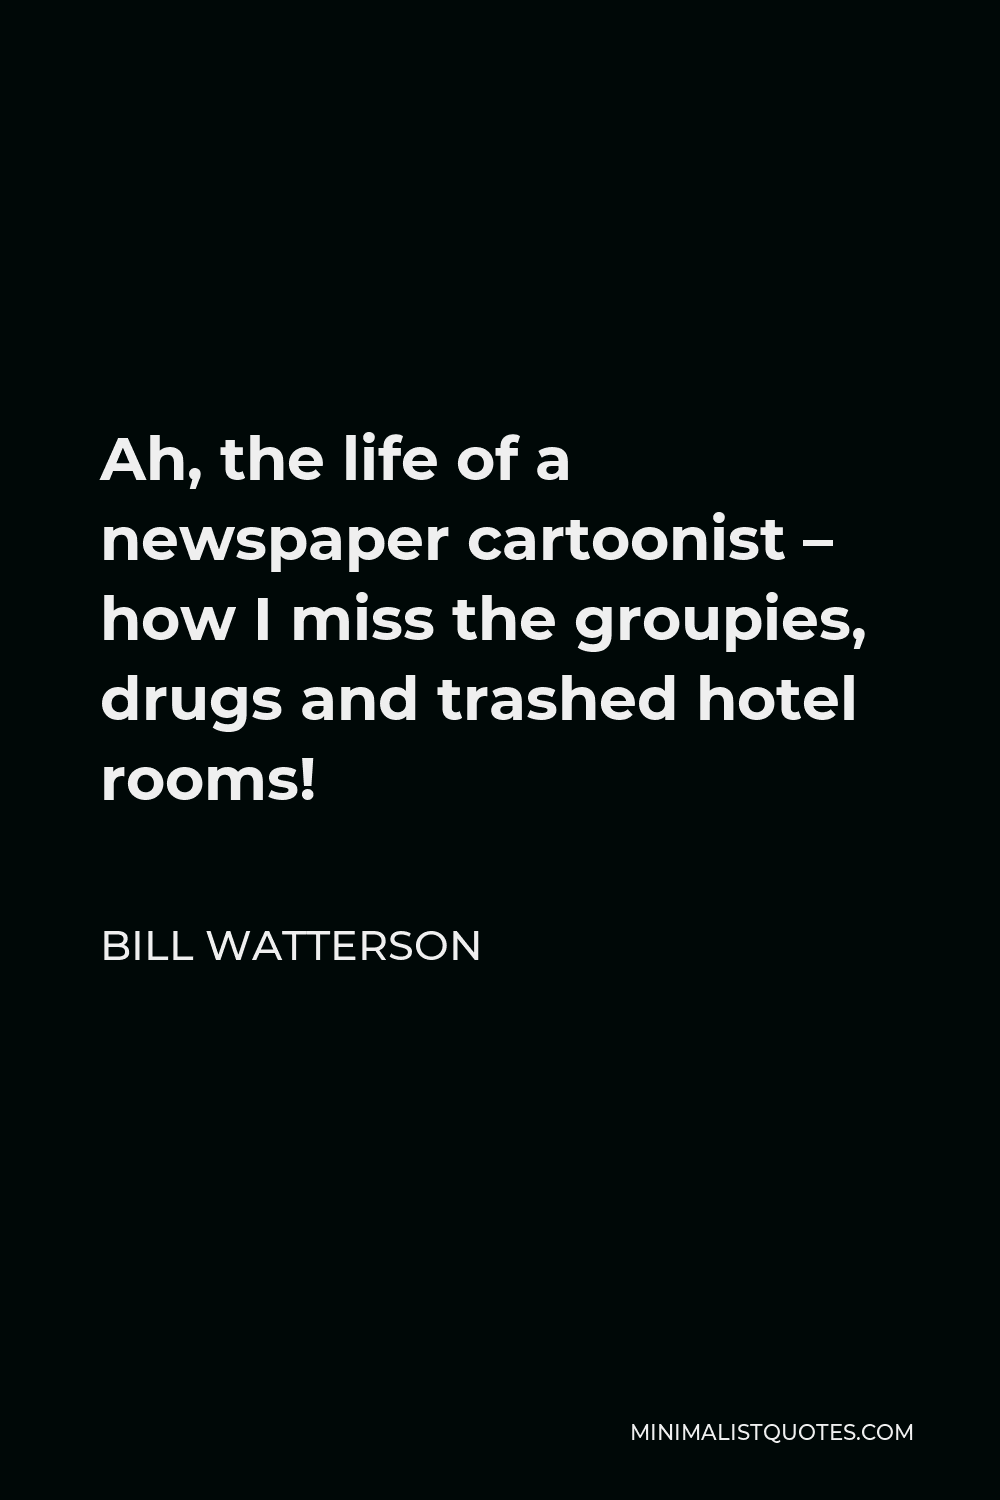 Bill Watterson Quote - Ah, the life of a newspaper cartoonist – how I miss the groupies, drugs and trashed hotel rooms!